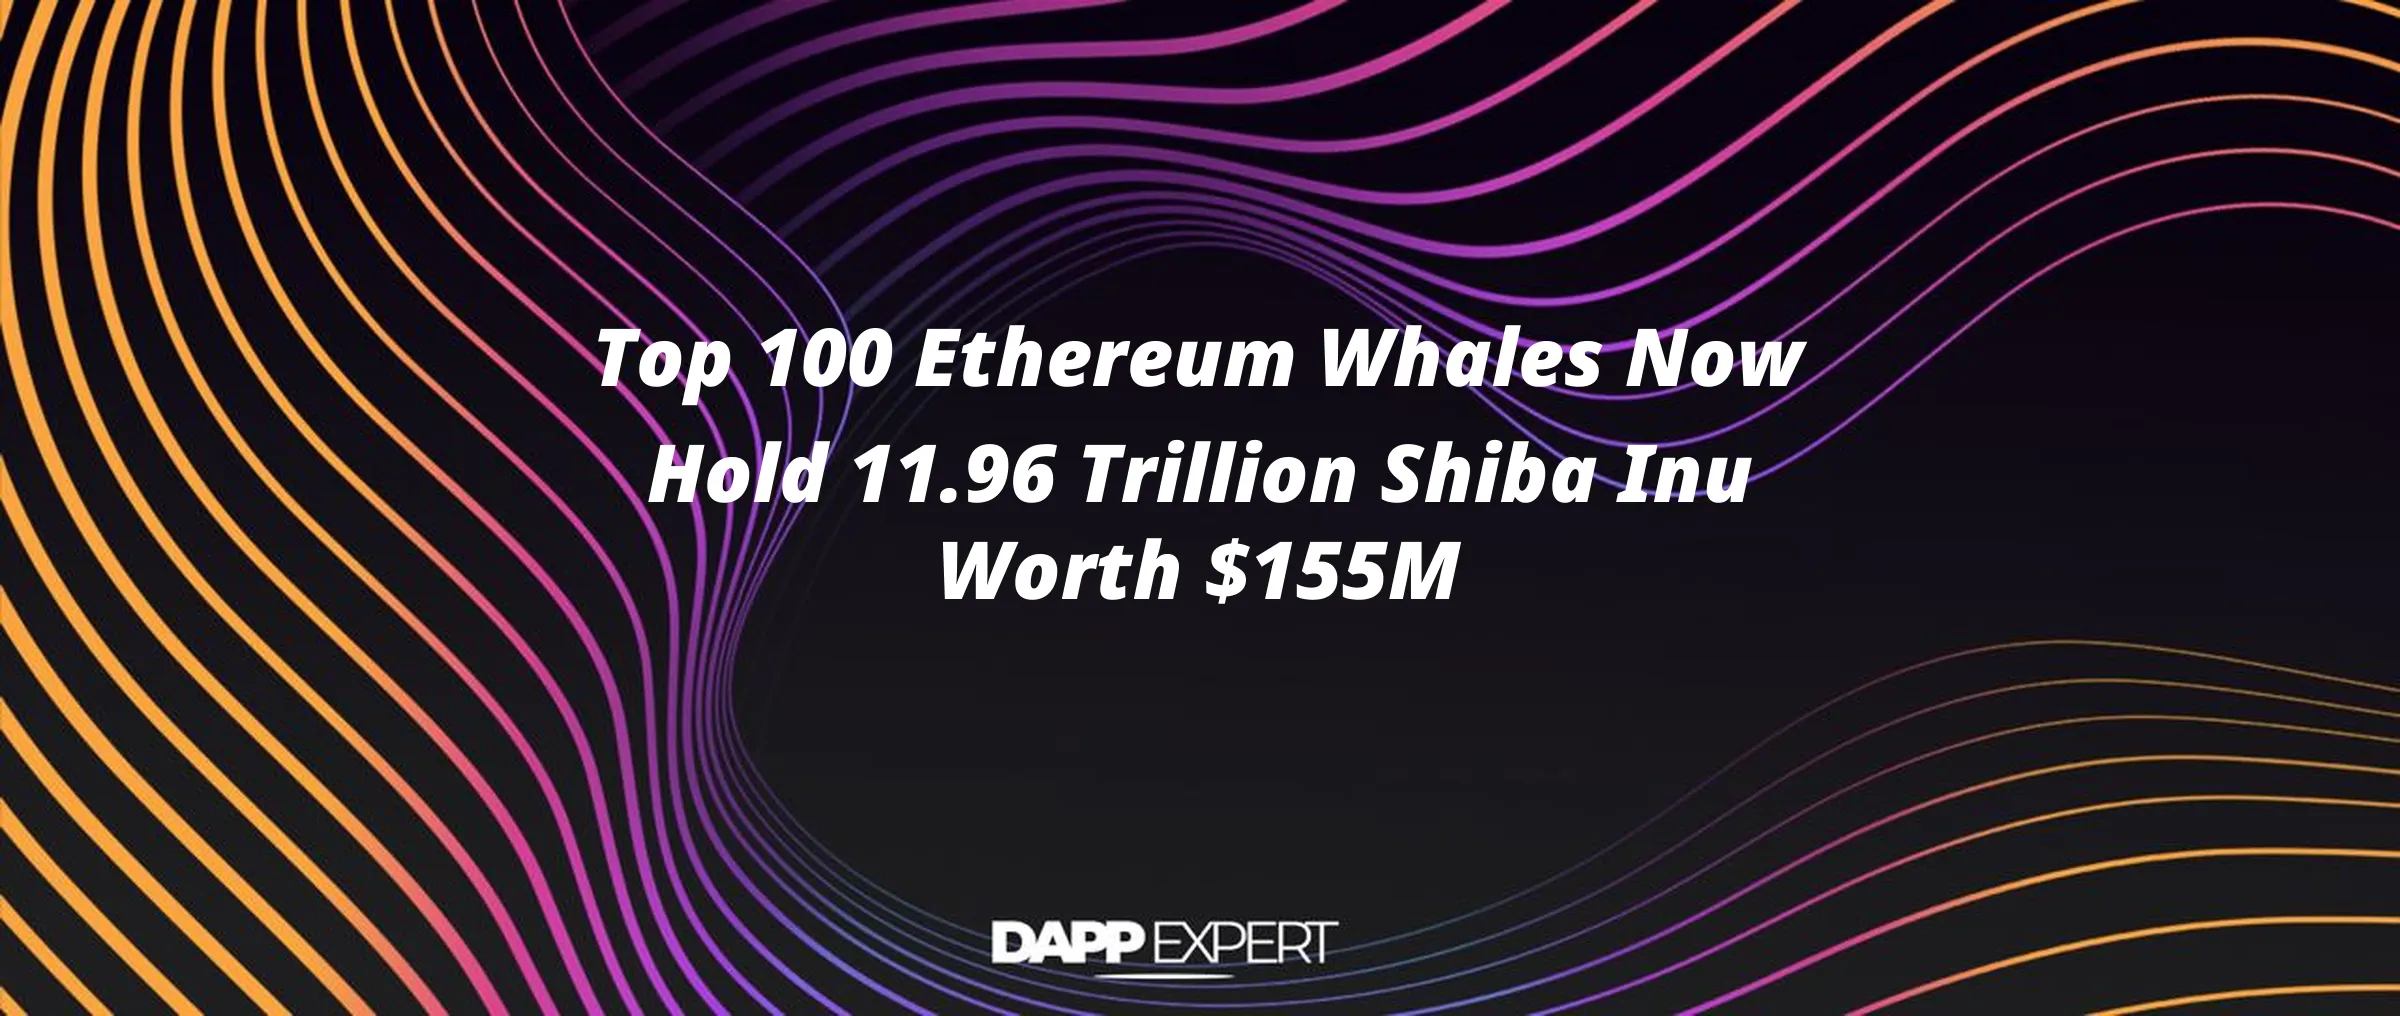 Top 100 Ethereum Whales Now Hold 11.96 Trillion Shiba Inu Worth $155M